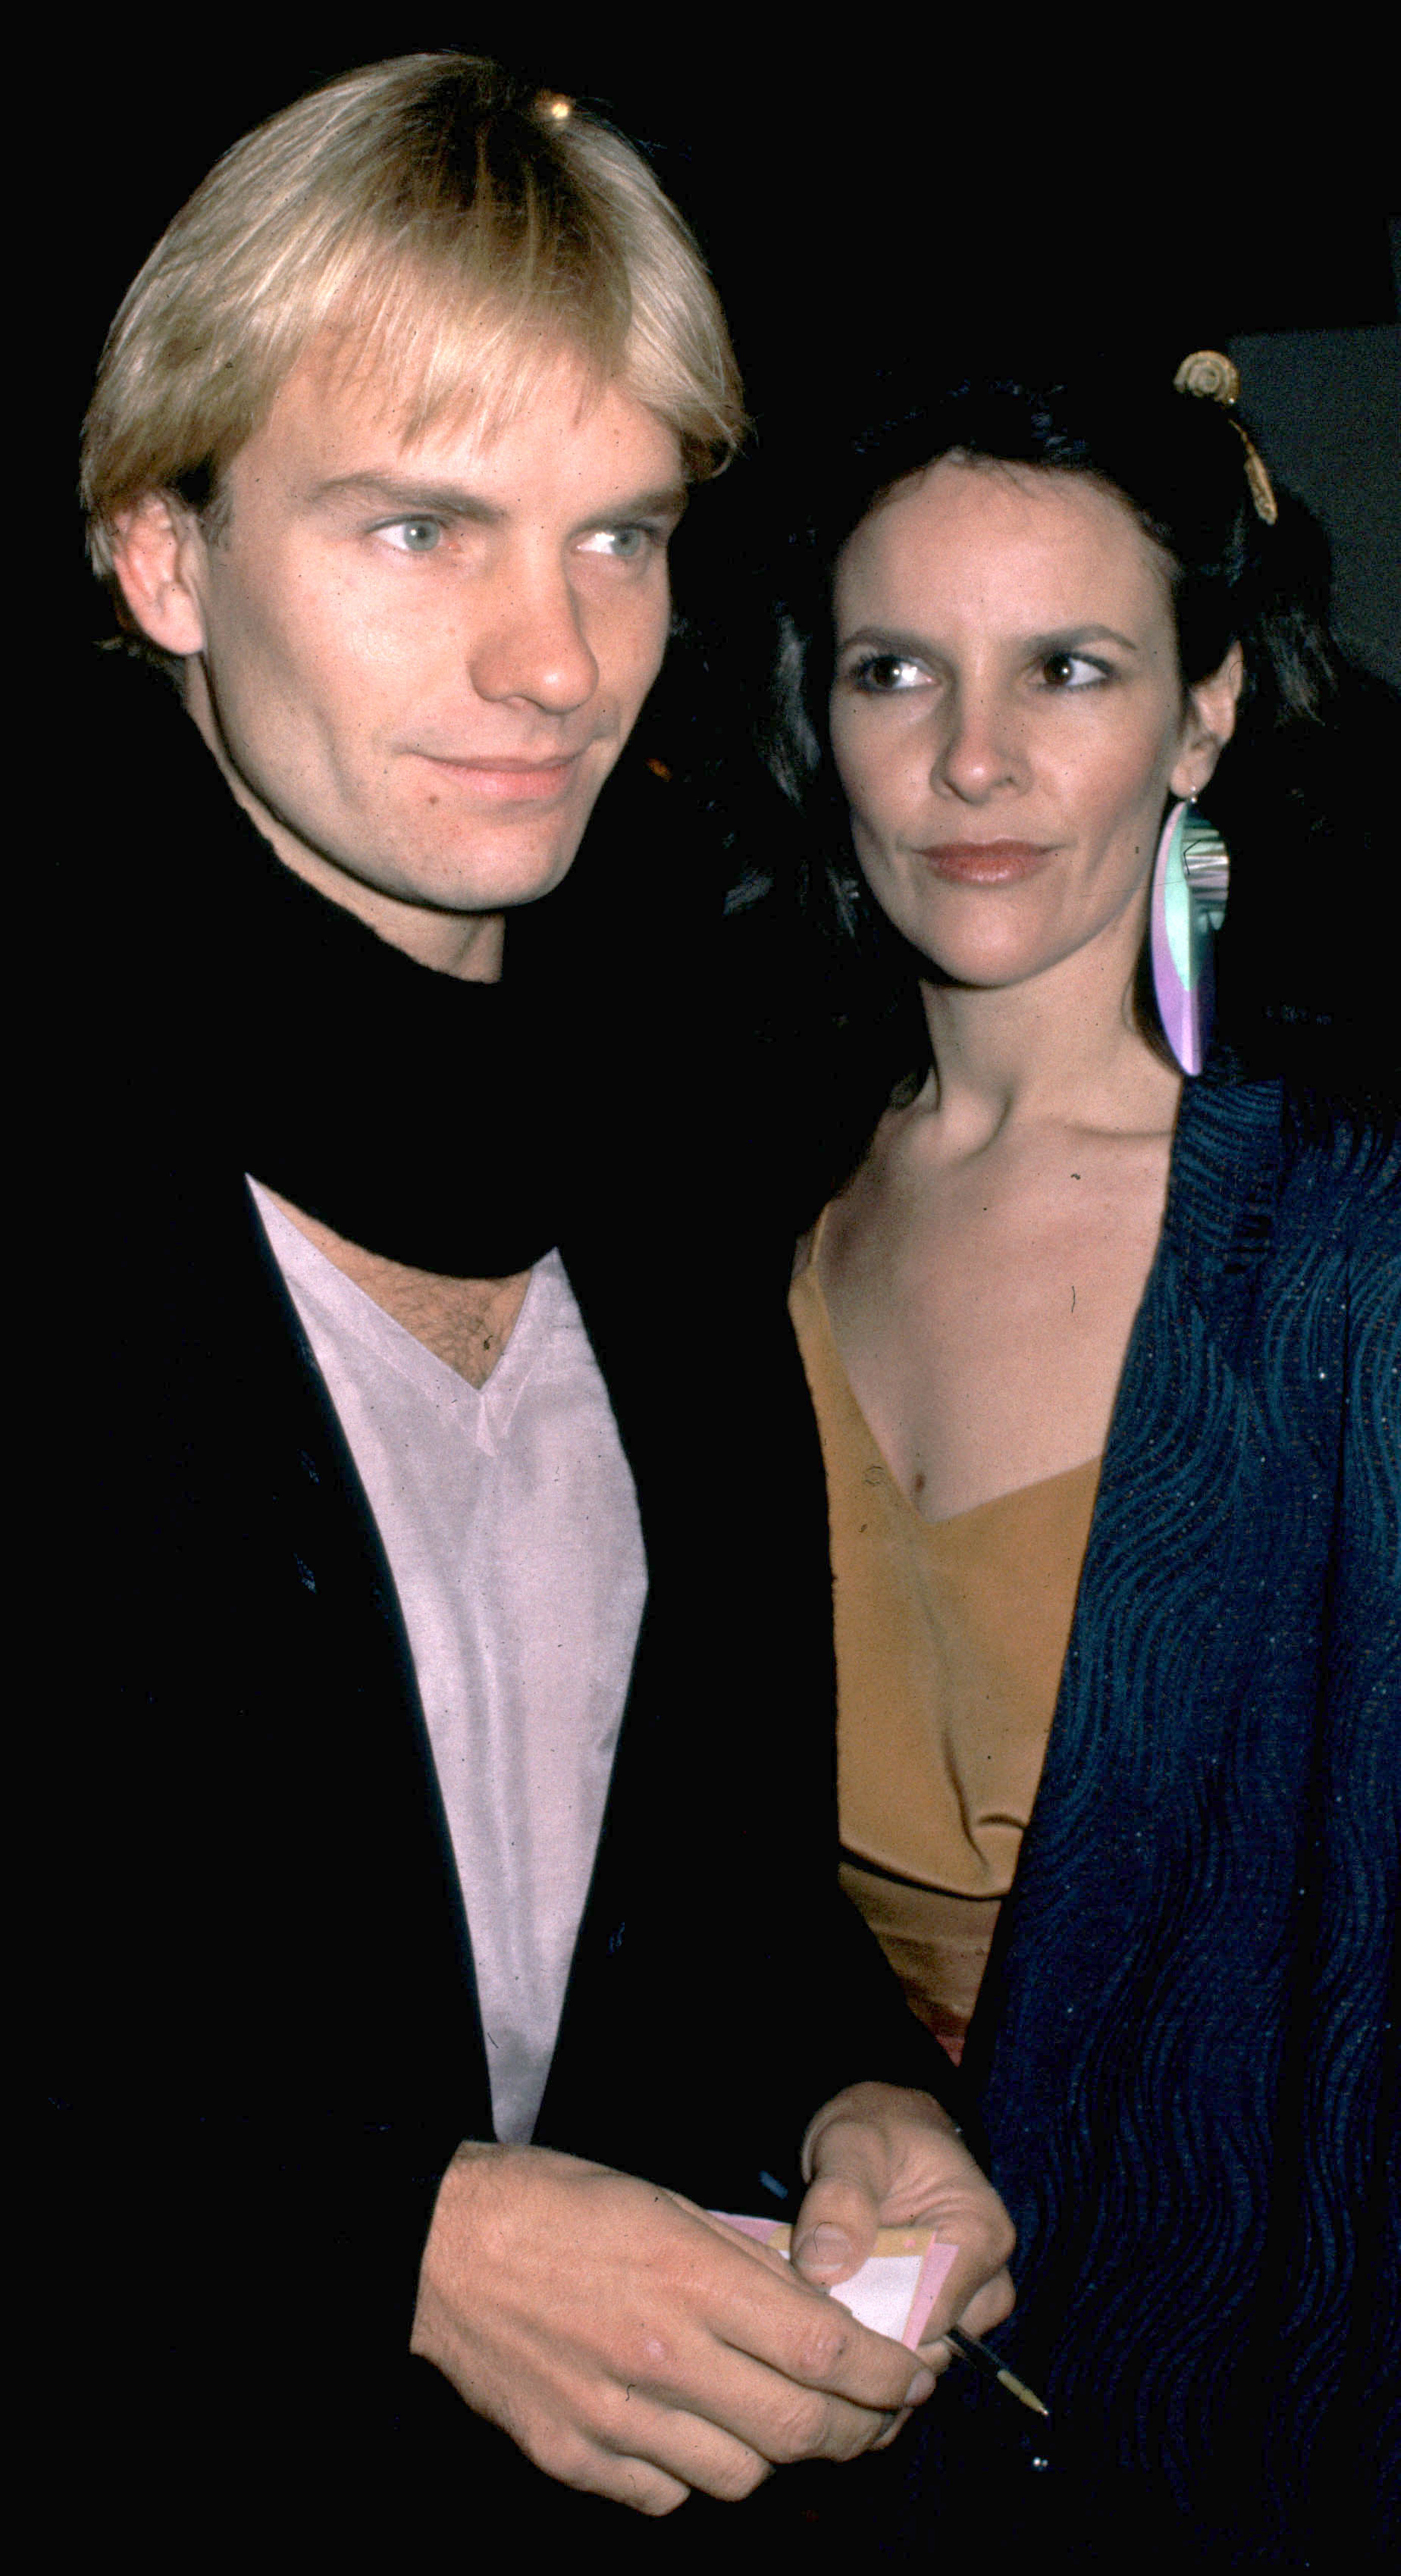 Sting and Frances Tomelty in 1980, in Hollywood, California. | Source: Getty Images